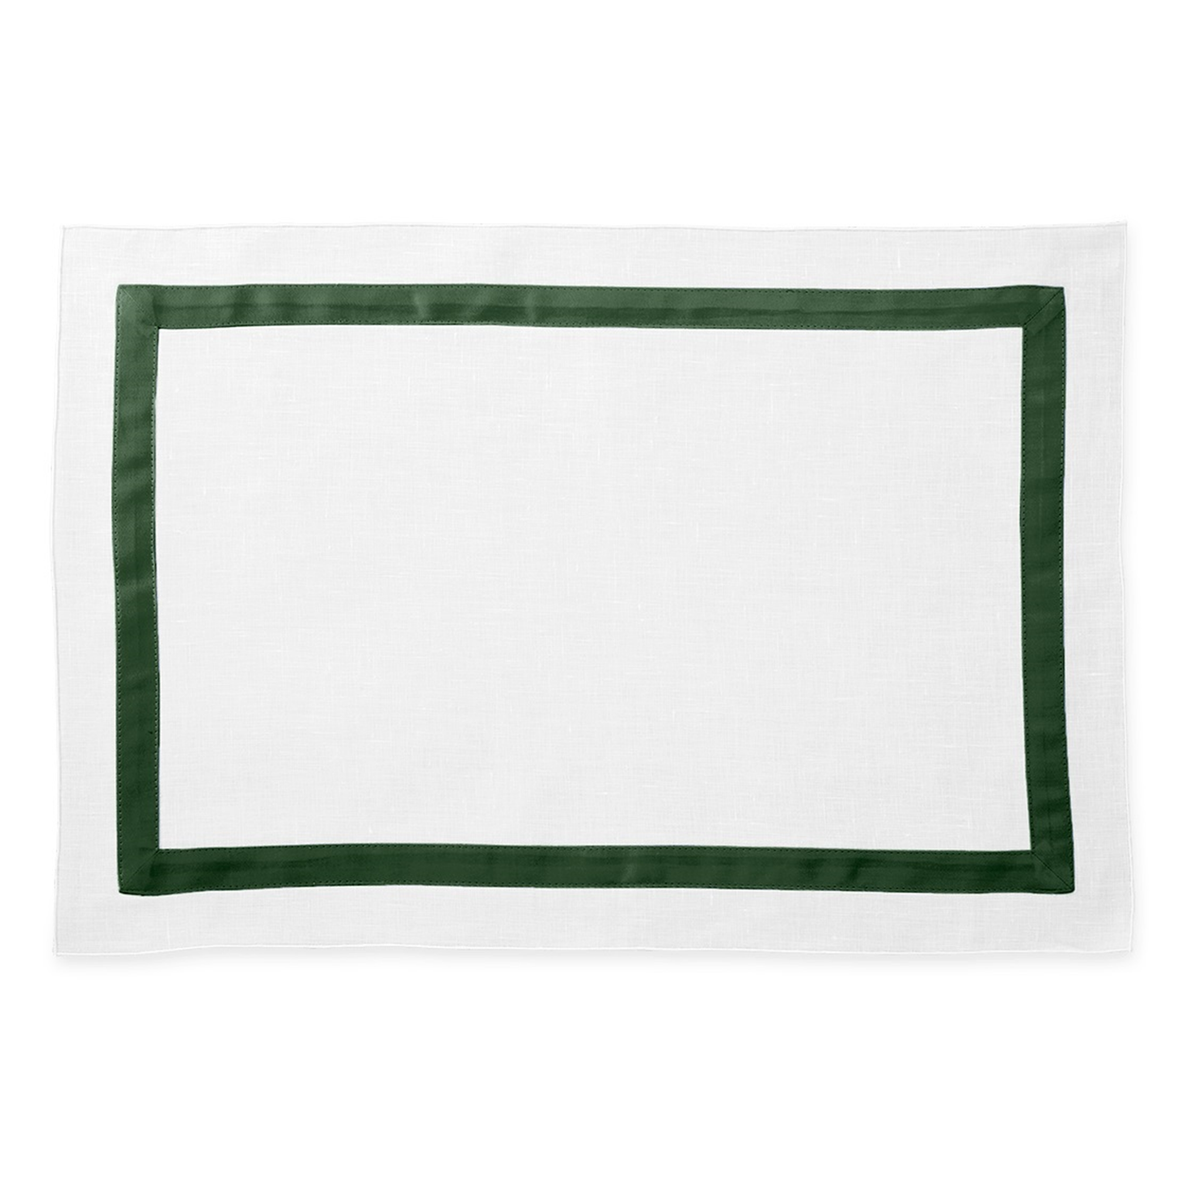 Placemat of Matouk Schumacher Lowell Table Linens in Color Green